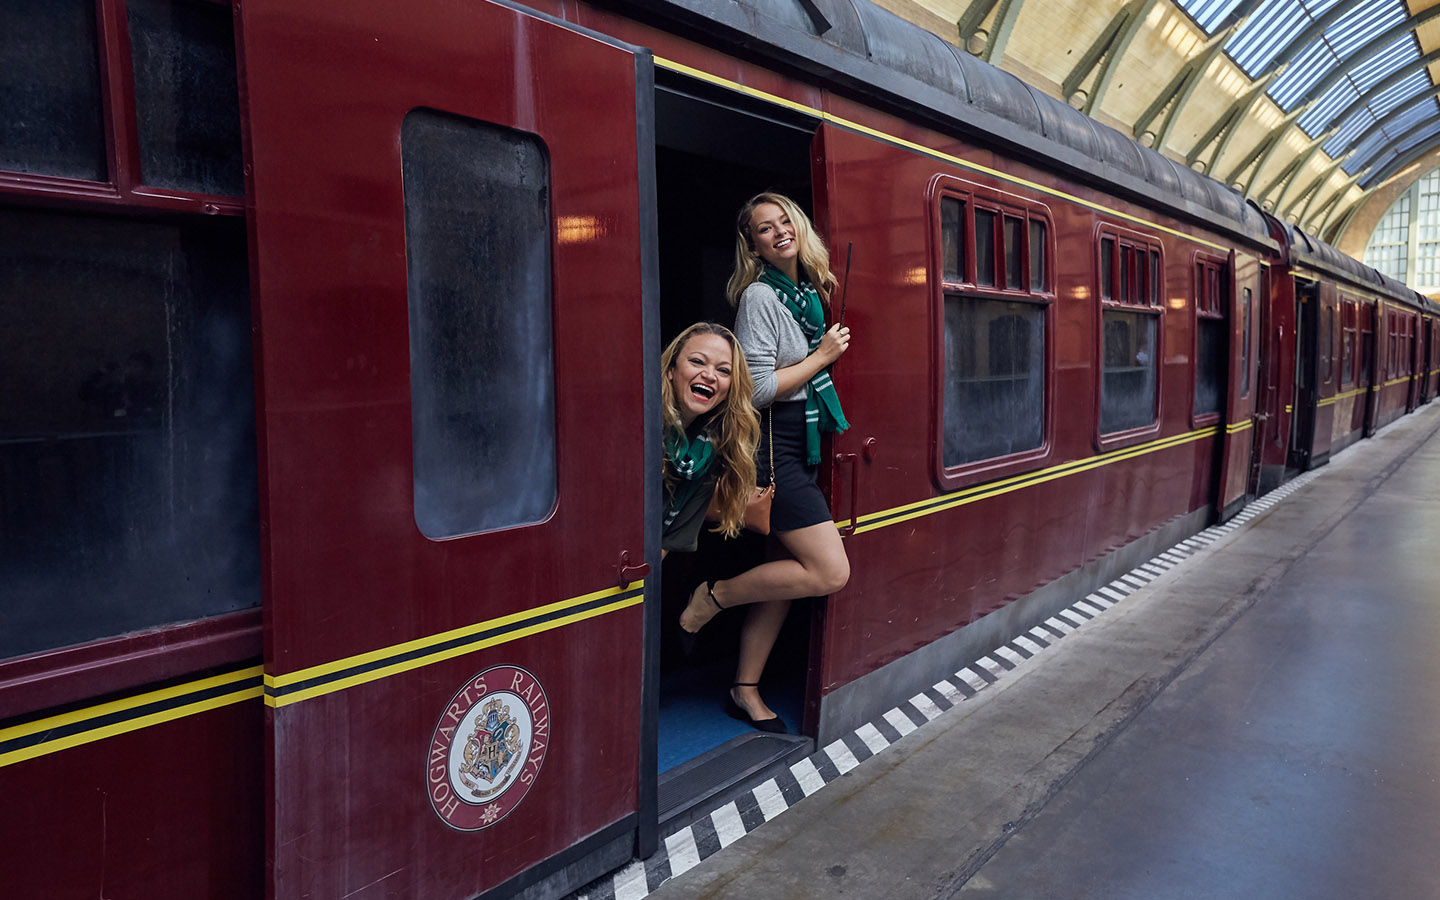 Hogwarts Express in The Wizarding World of Harry Potter - Jet Sisters